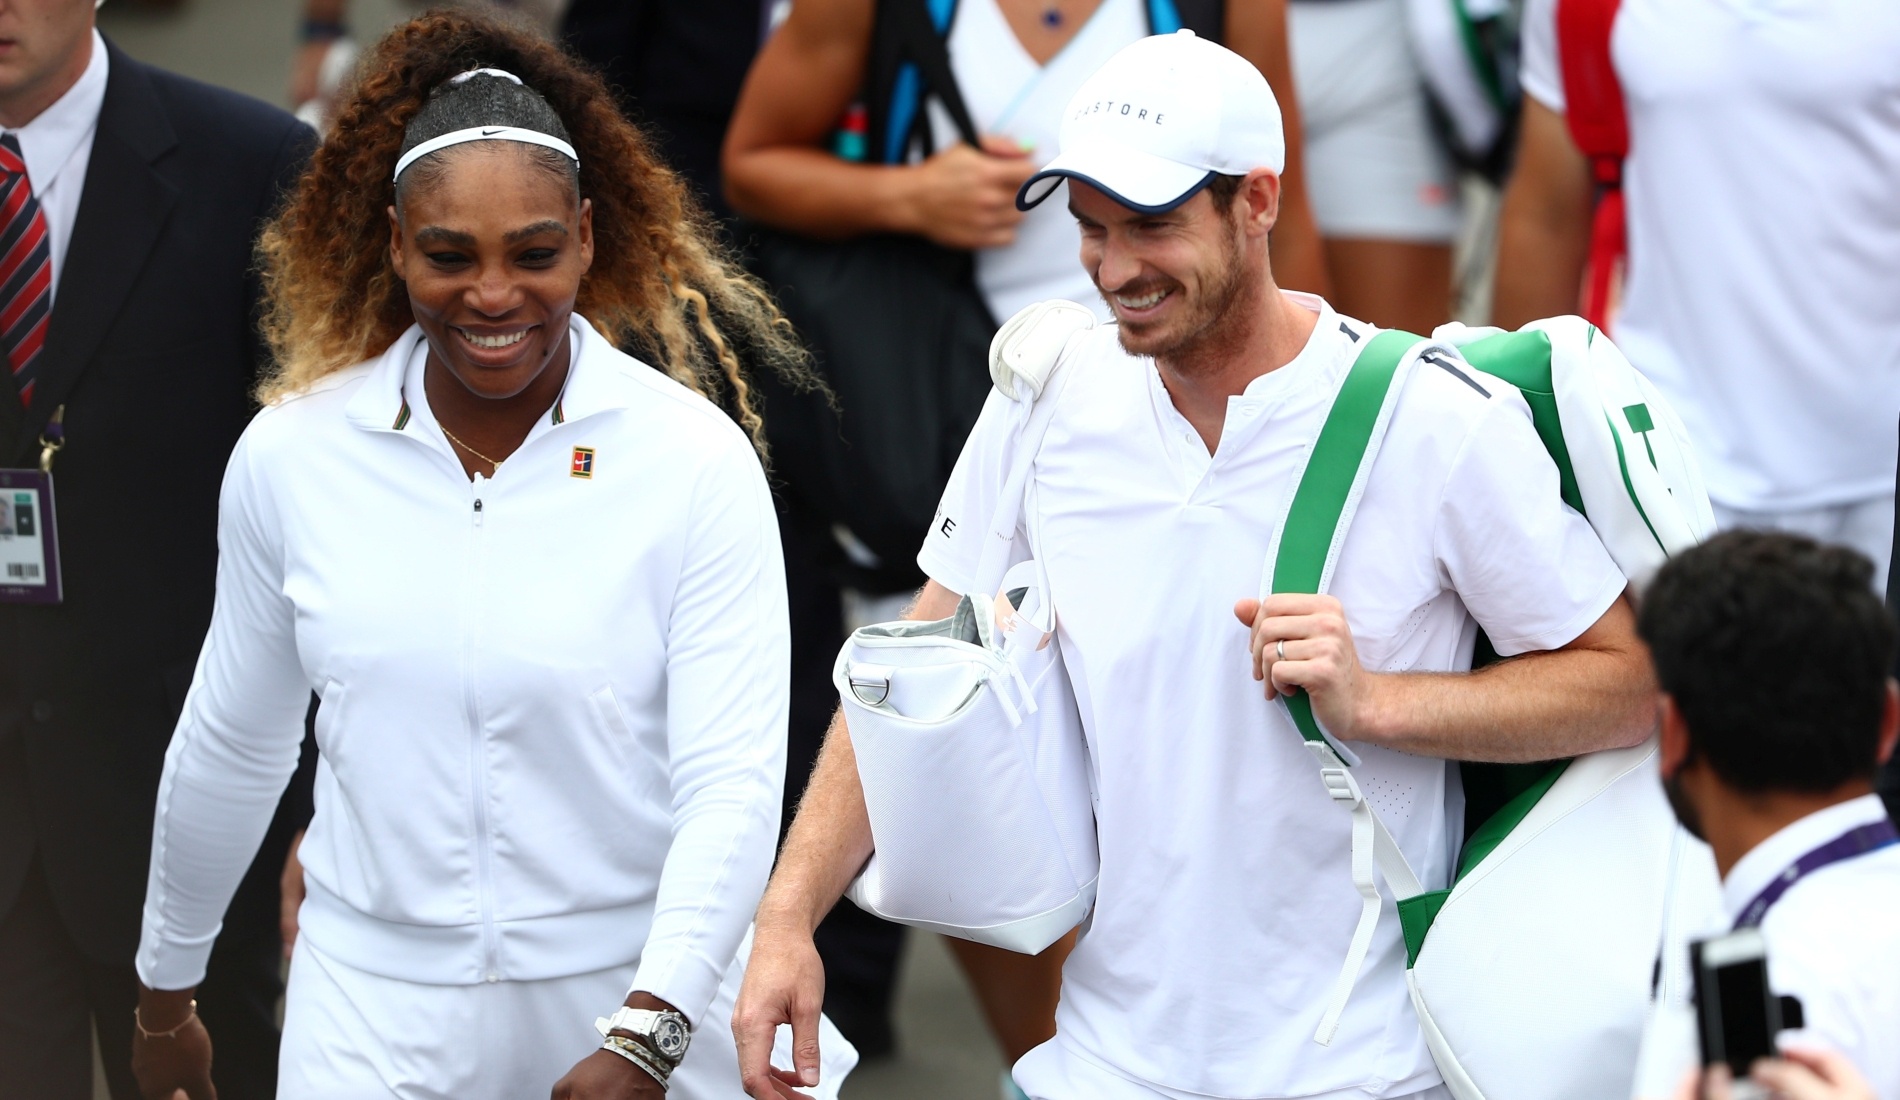 Serena Williams and Andy Murray playing mixed doubles at Wimbledon in 2019